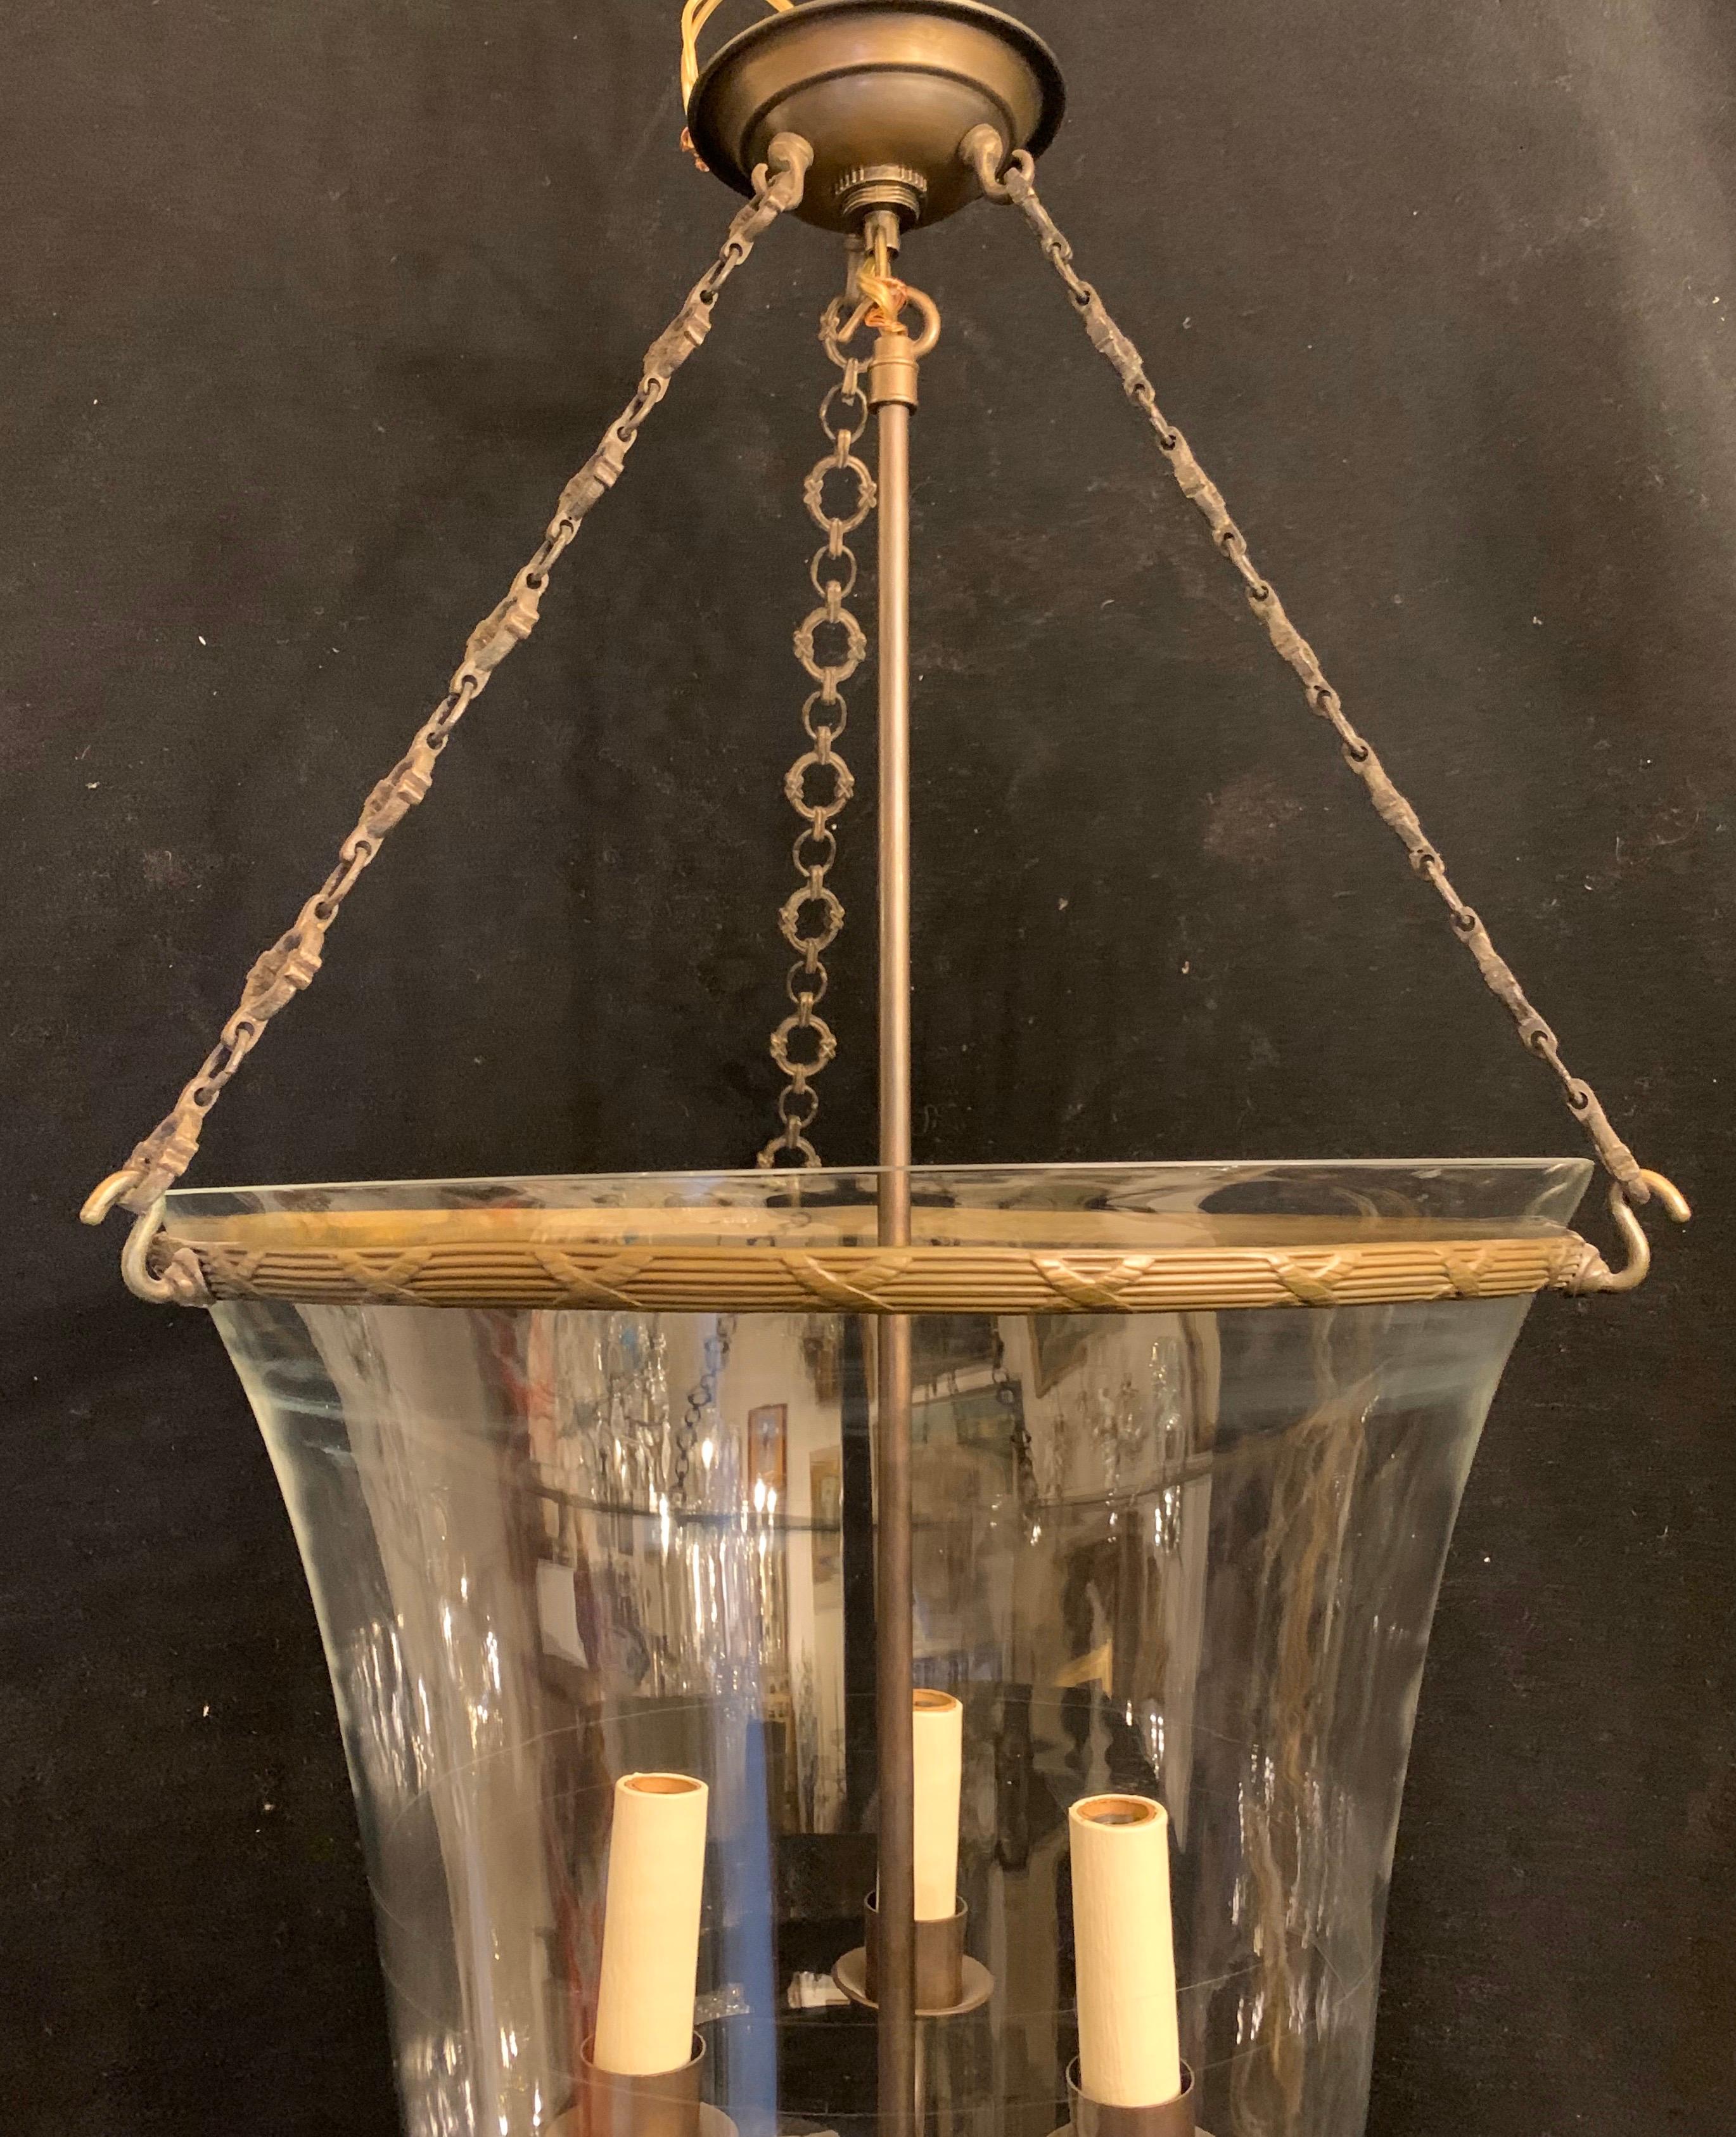 A wonderful large Vaughan glass globe bell jar lantern, rewired with candelabra sockets and has a bronze ribbon and reed rim leading to three decorative chains.

